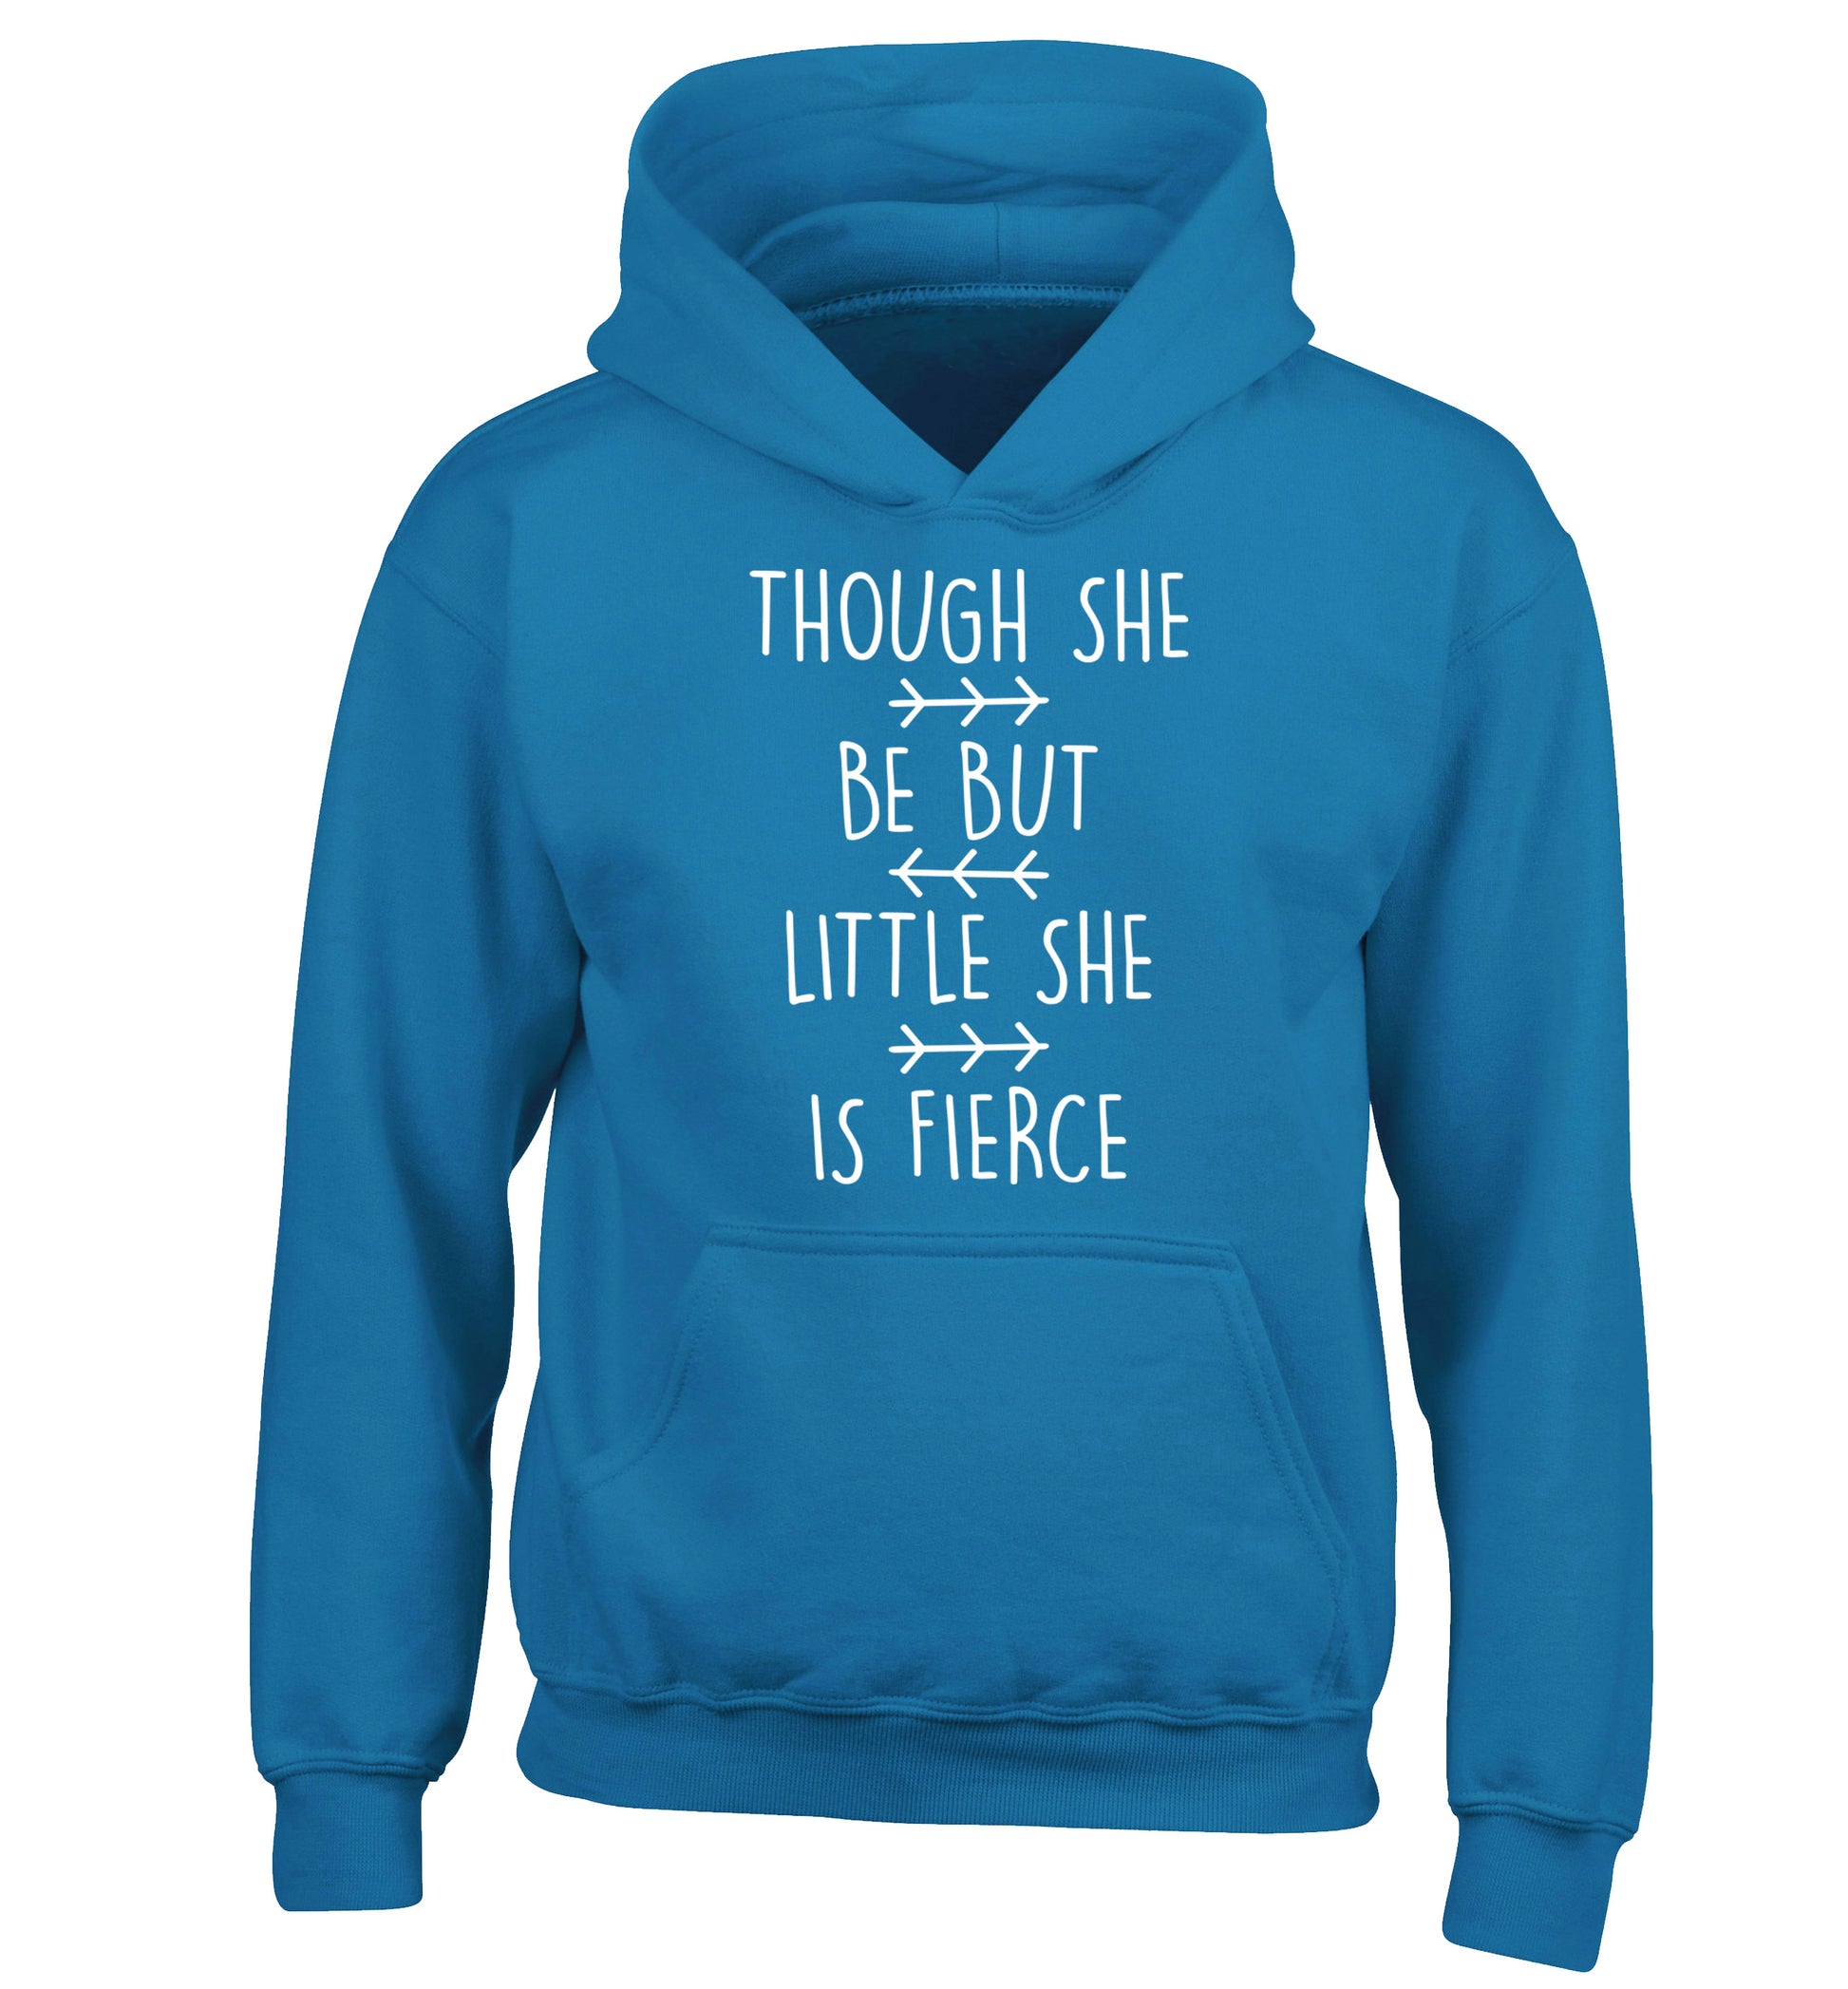 Though she be little she be fierce children's blue hoodie 12-14 Years